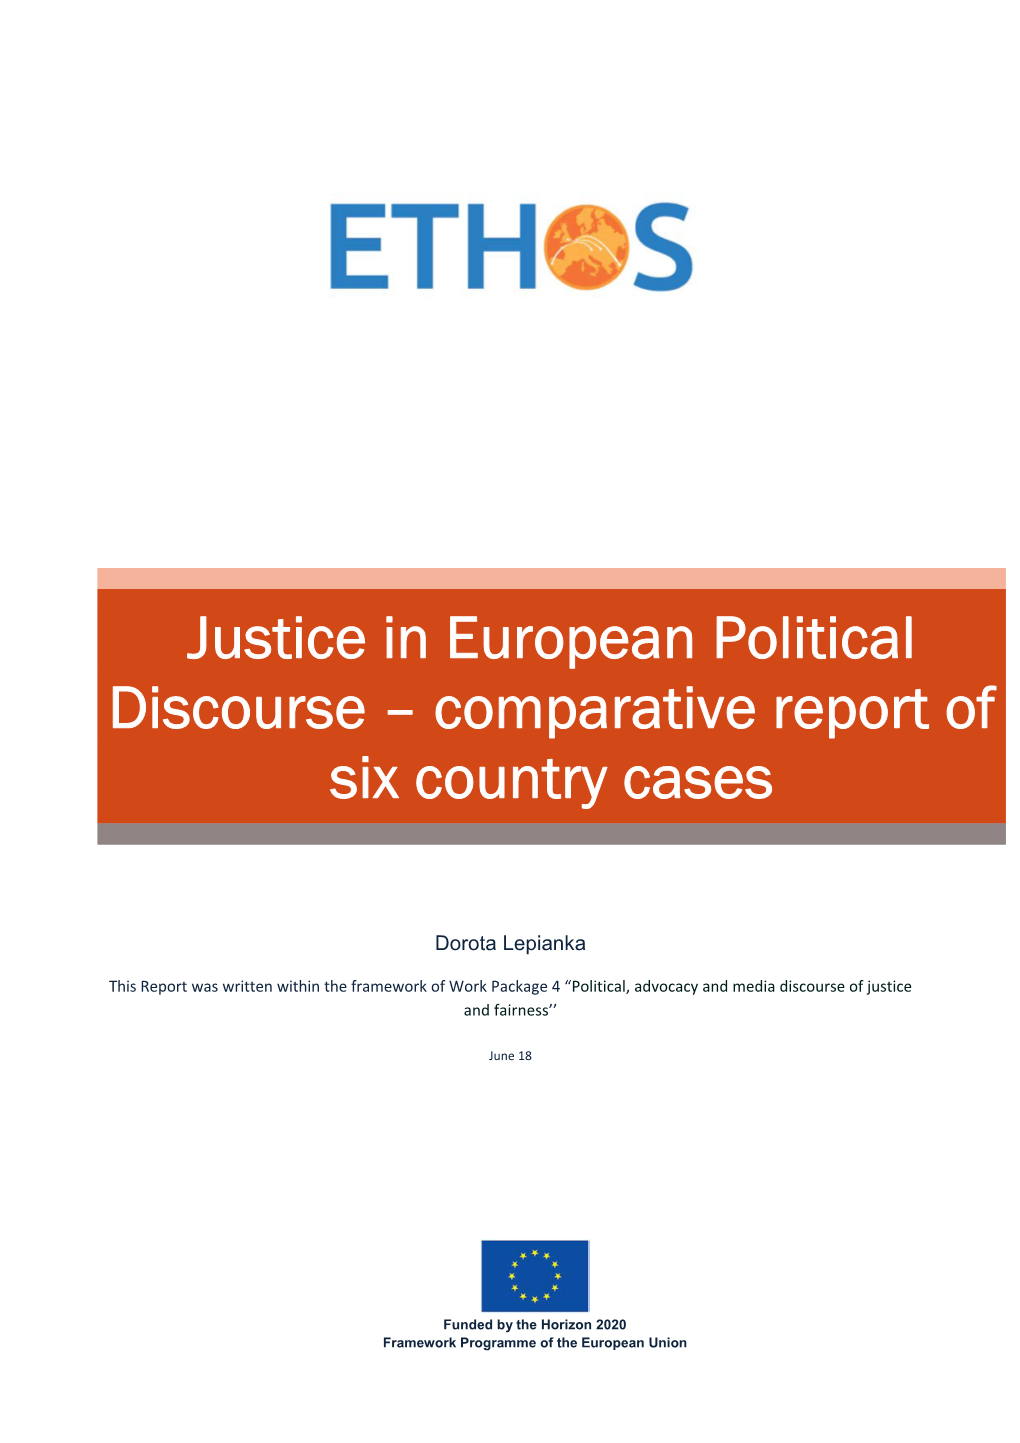 Justice in European Political Discourse – Comparative Report of Six Country Cases